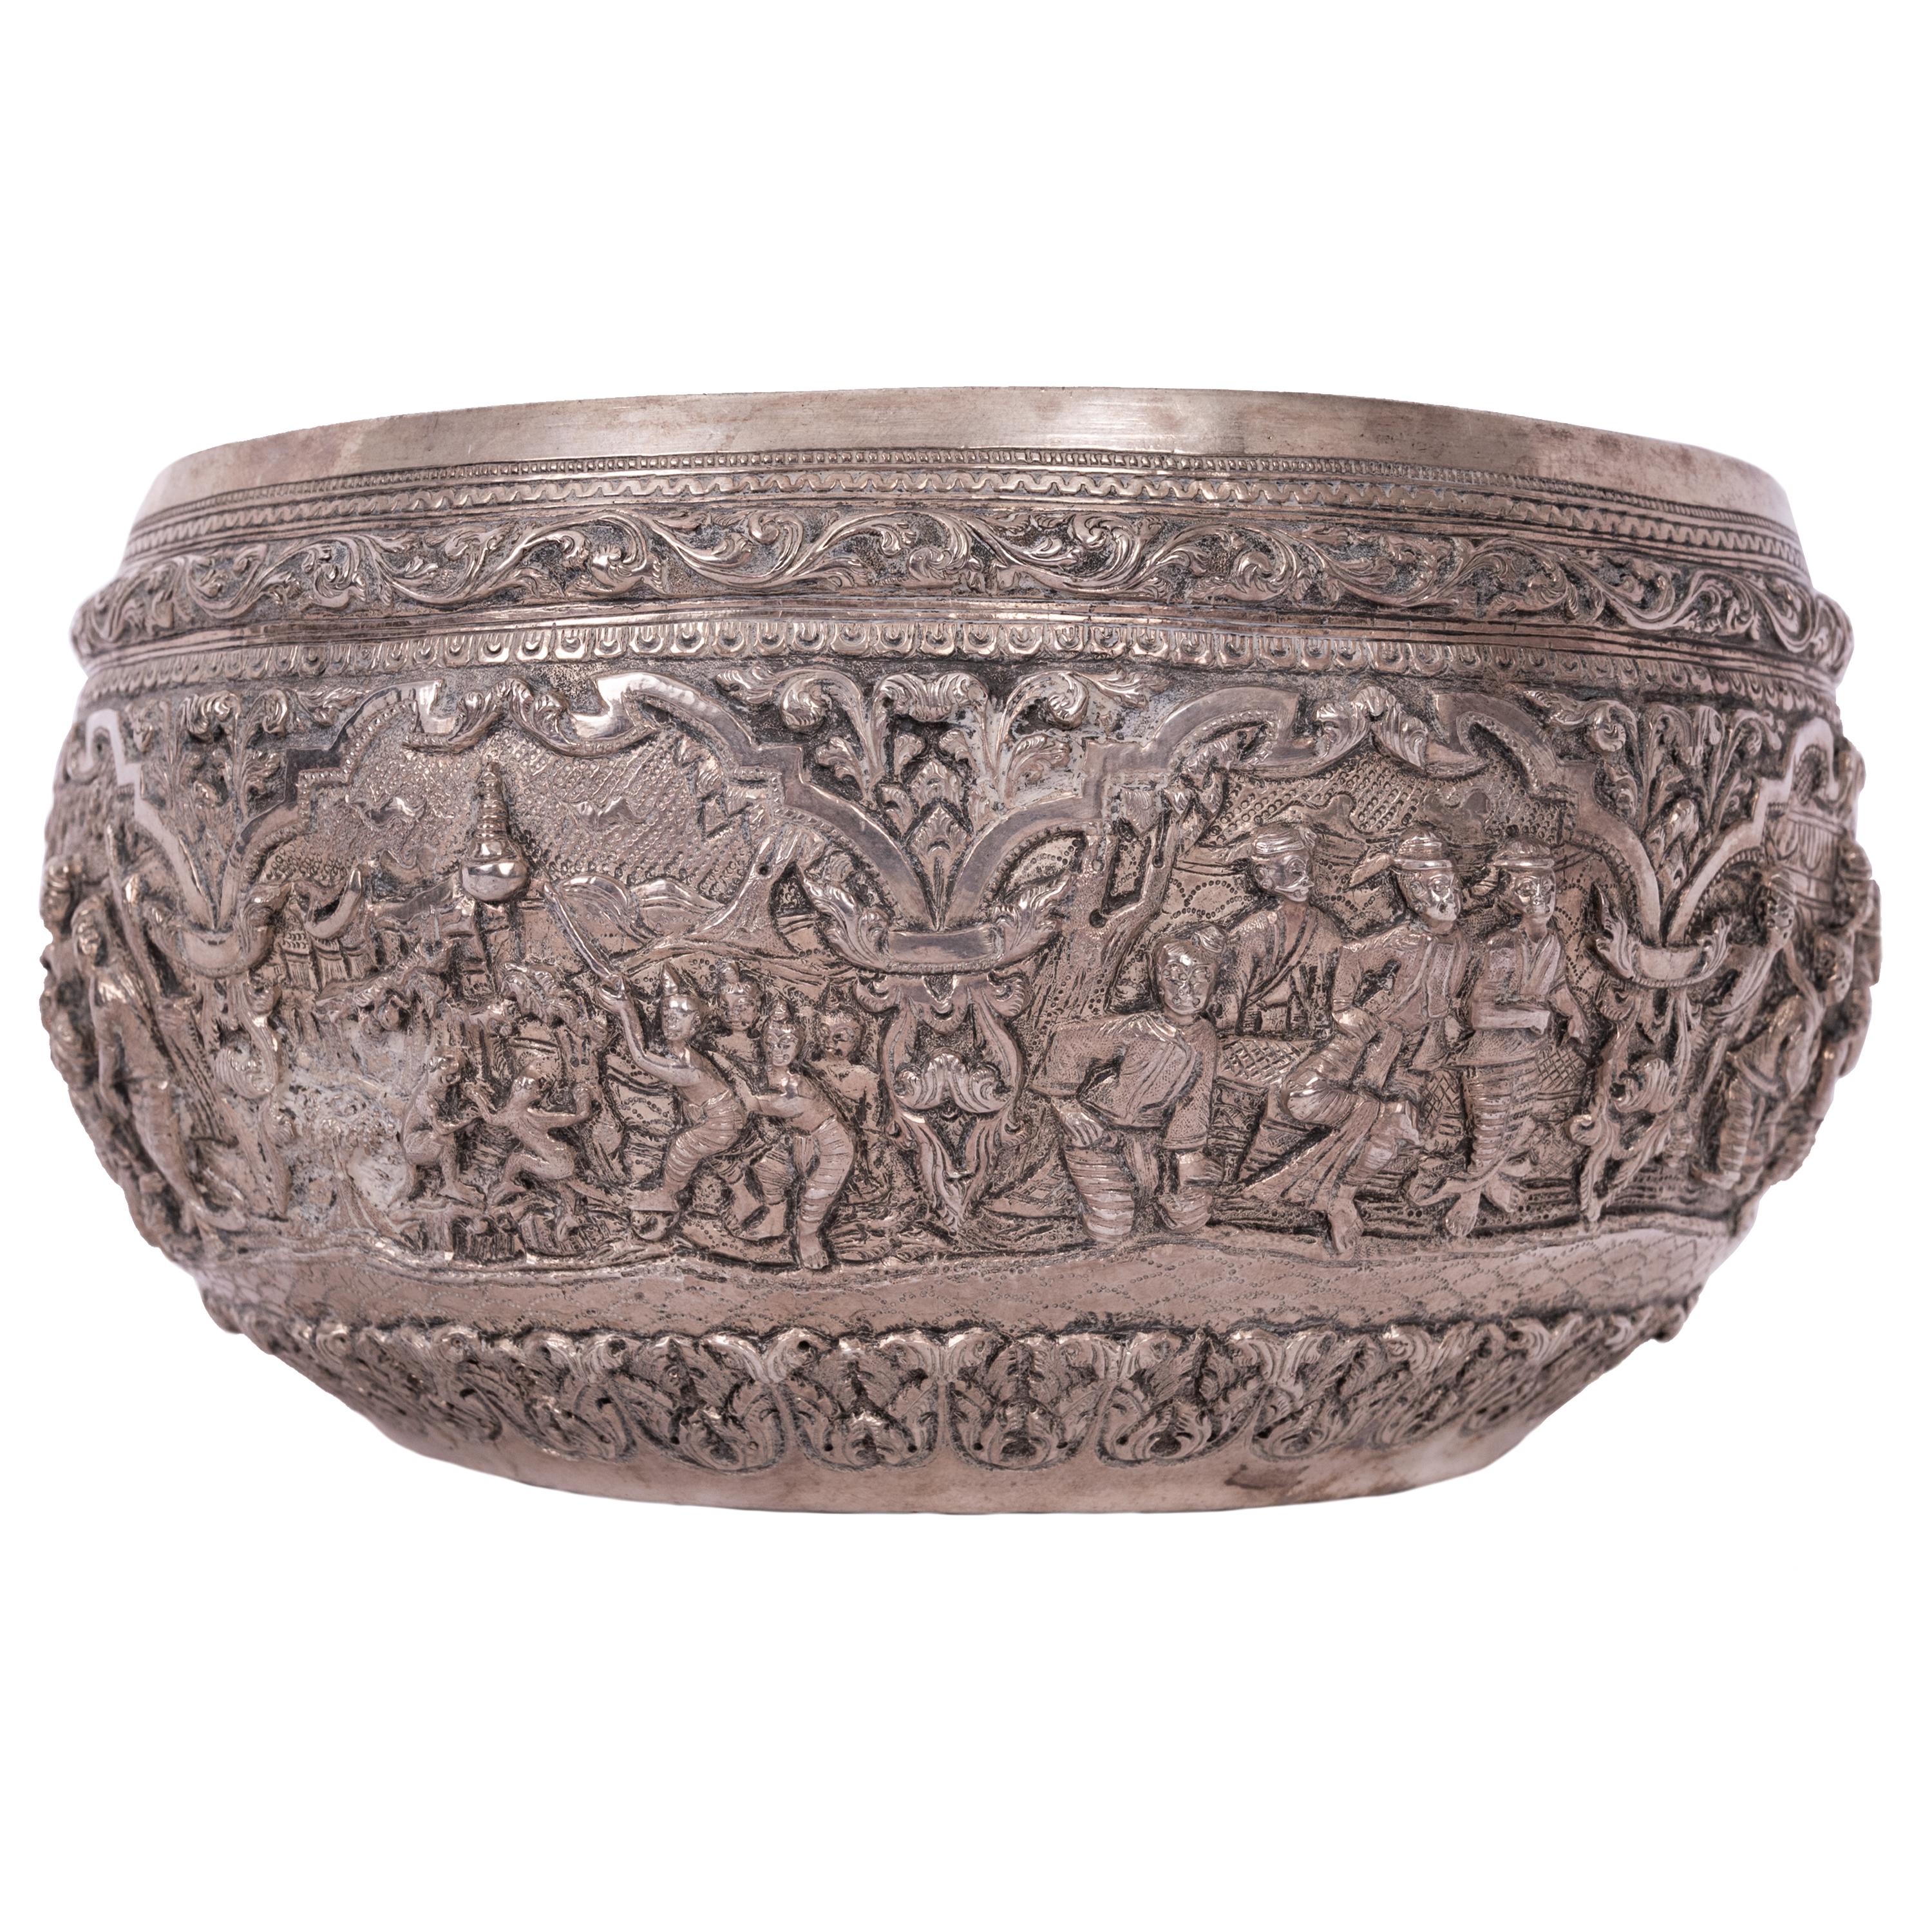 Antique Burmese Repousse Silver Buddhist Thabeik Offering Bowl Guanyin Mark 1890 For Sale 1